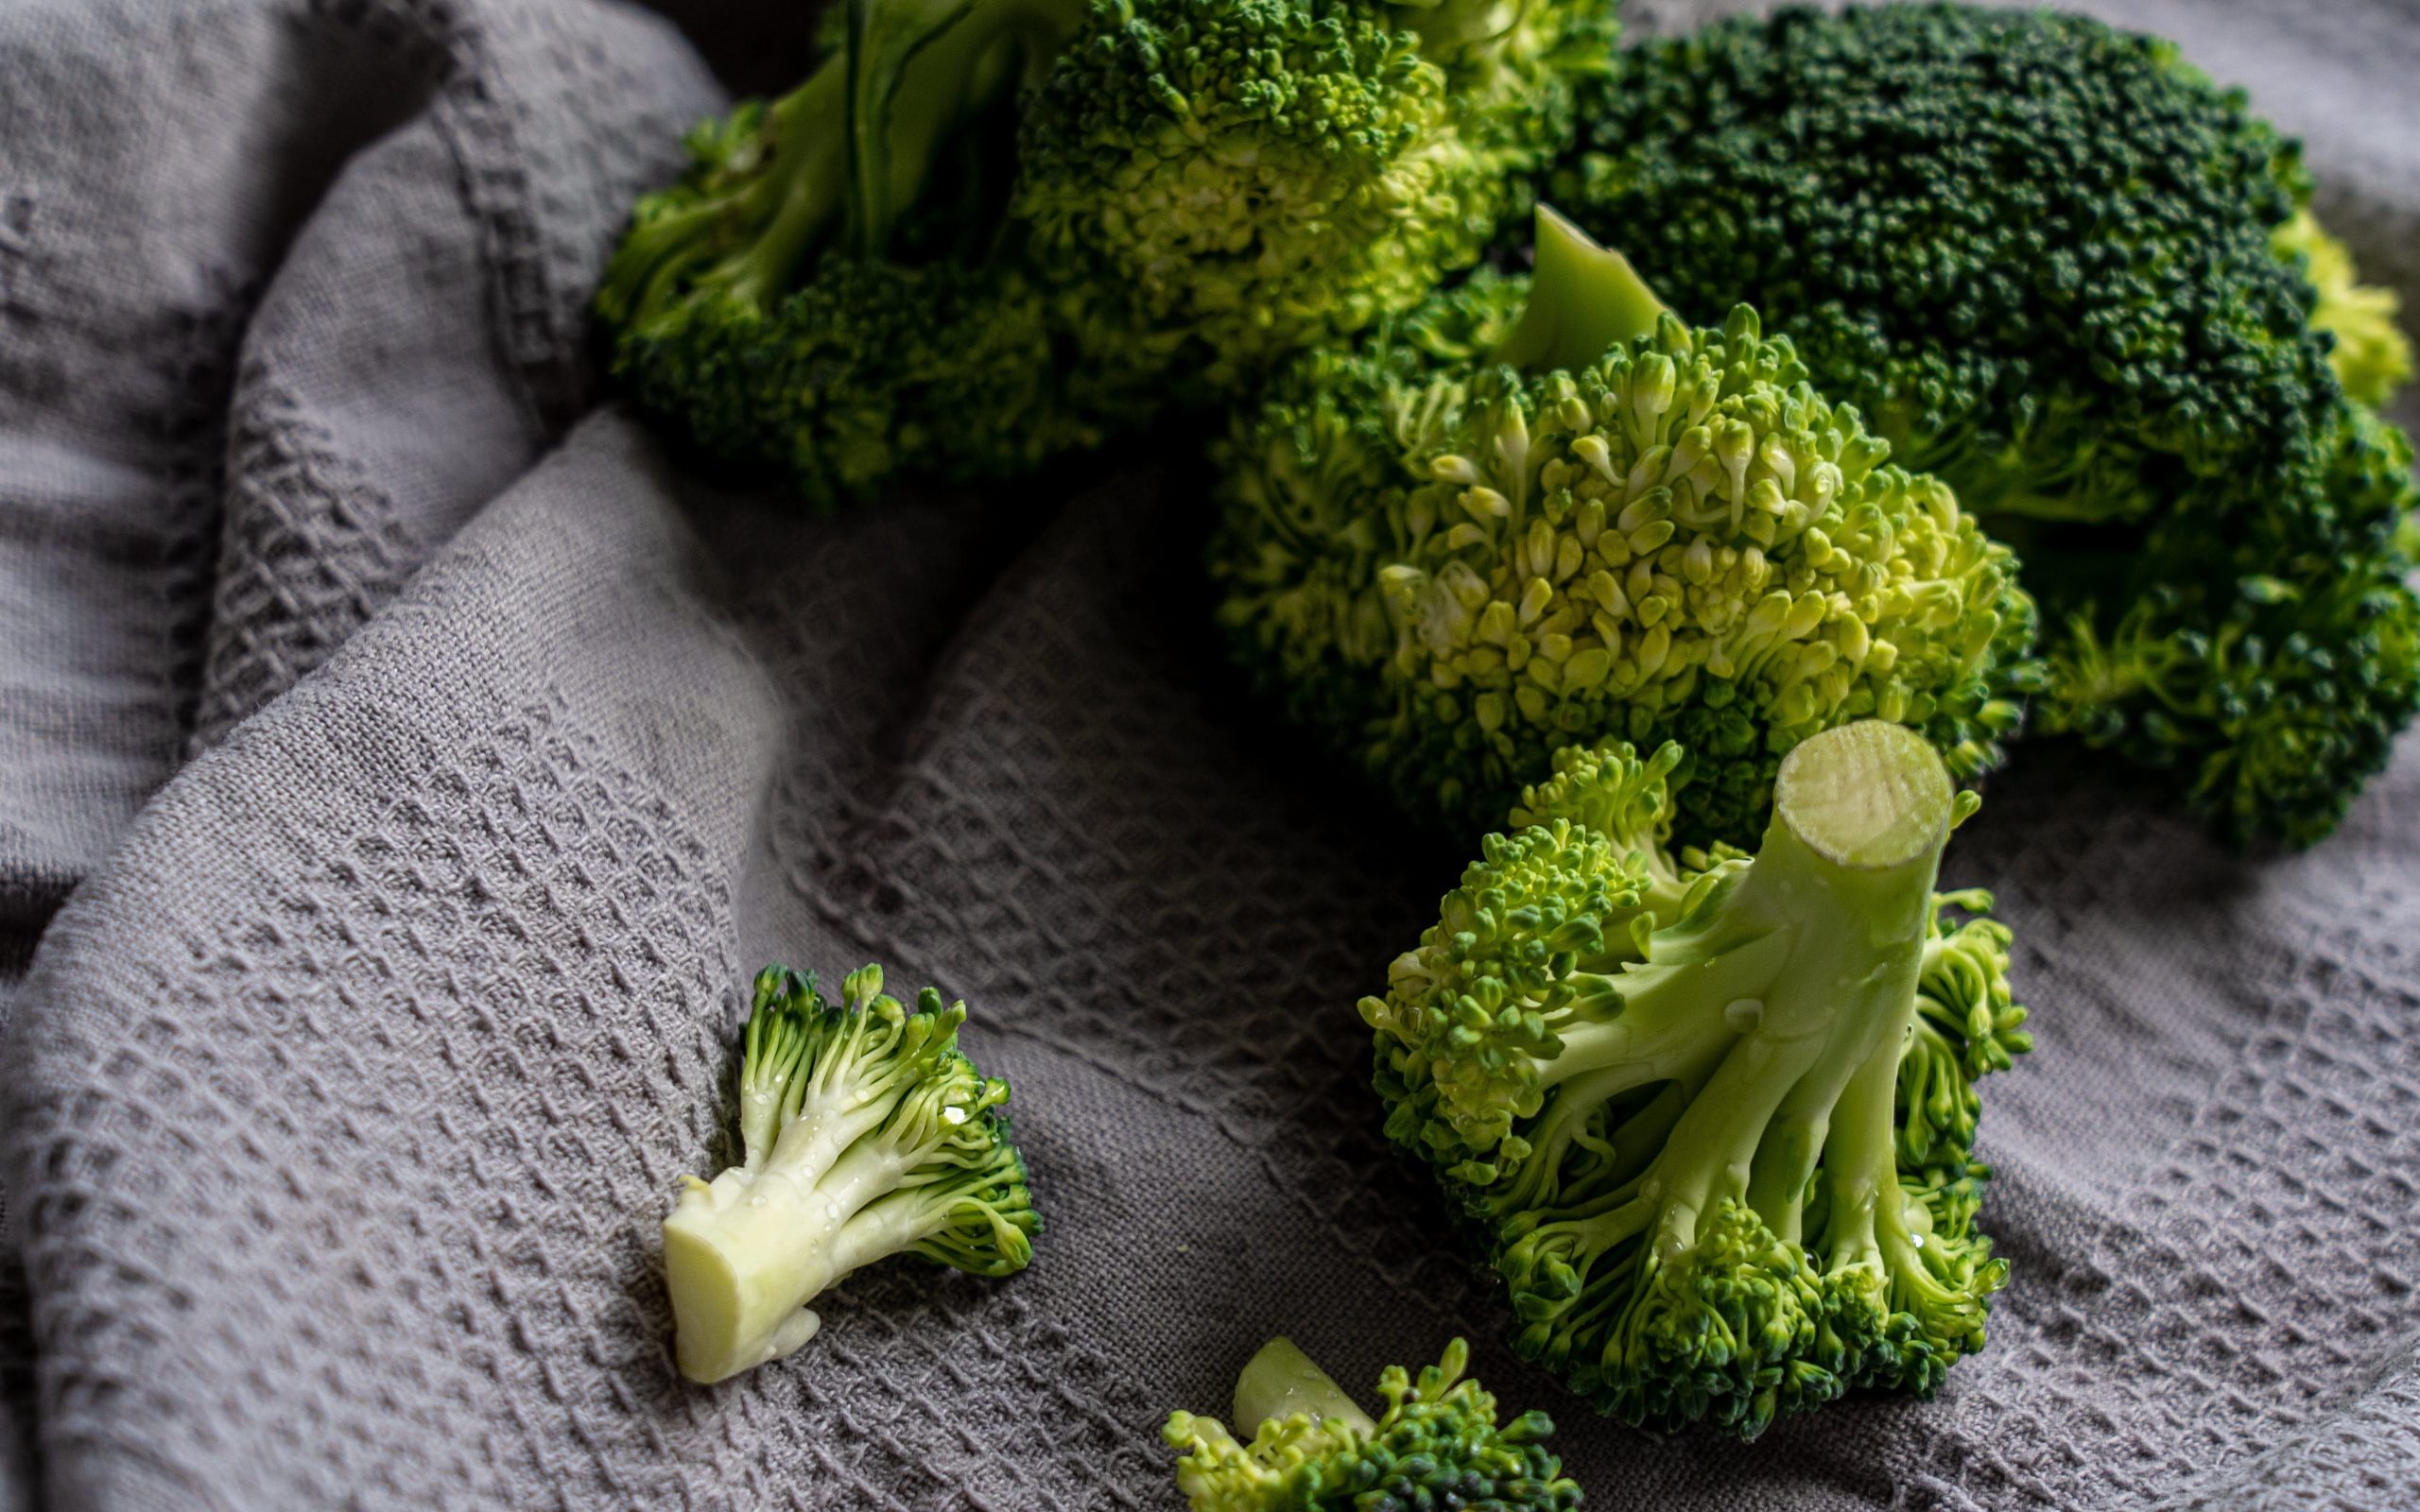 Broccoli aids digestion and promotes gut health helping in weight management